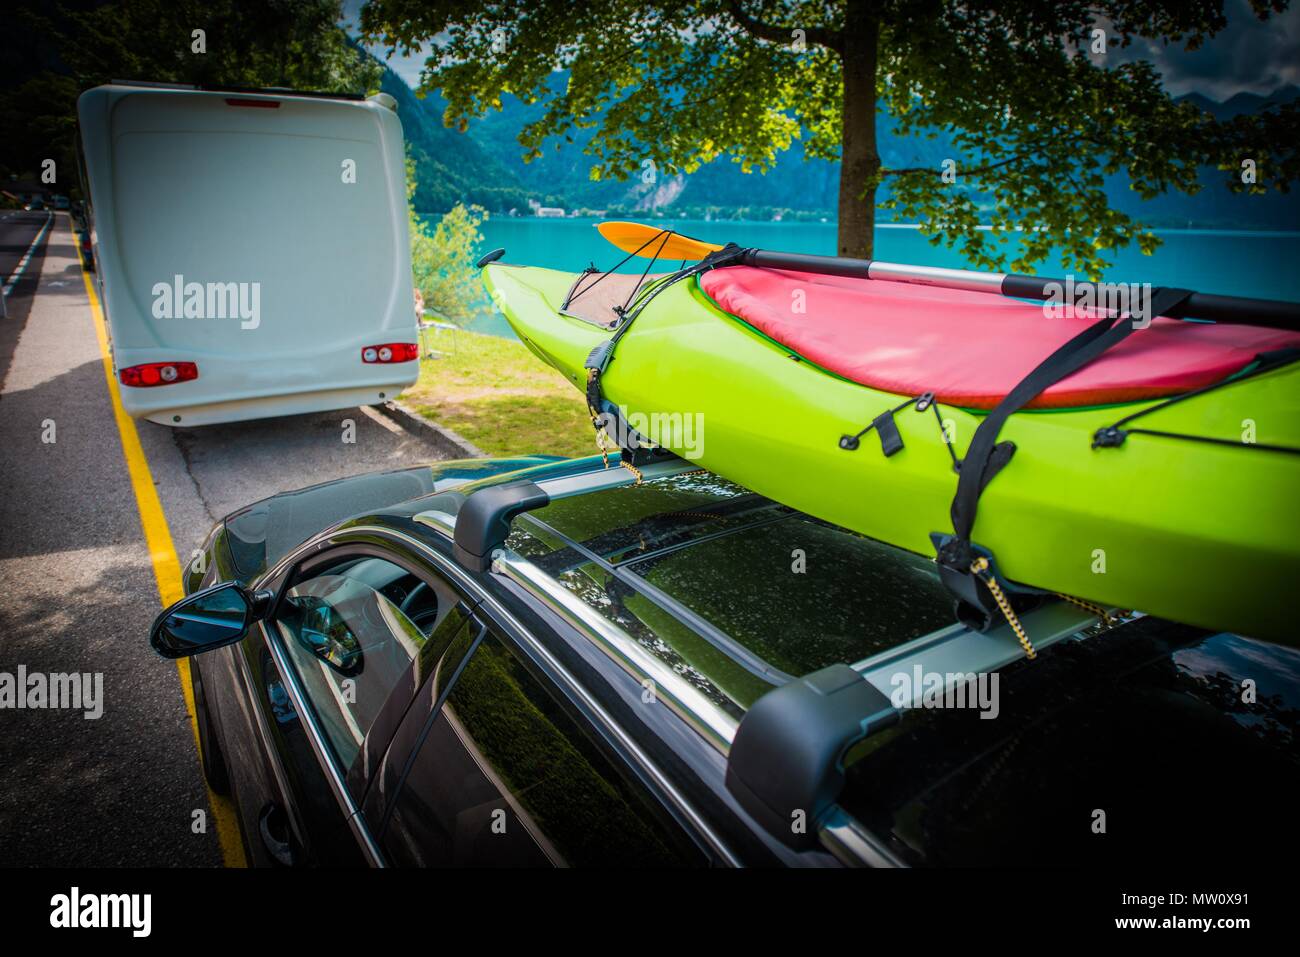 Summer Time Kayak Transportation on the Car Roof Rack. Vacation Trip with the Kayak. Stock Photo